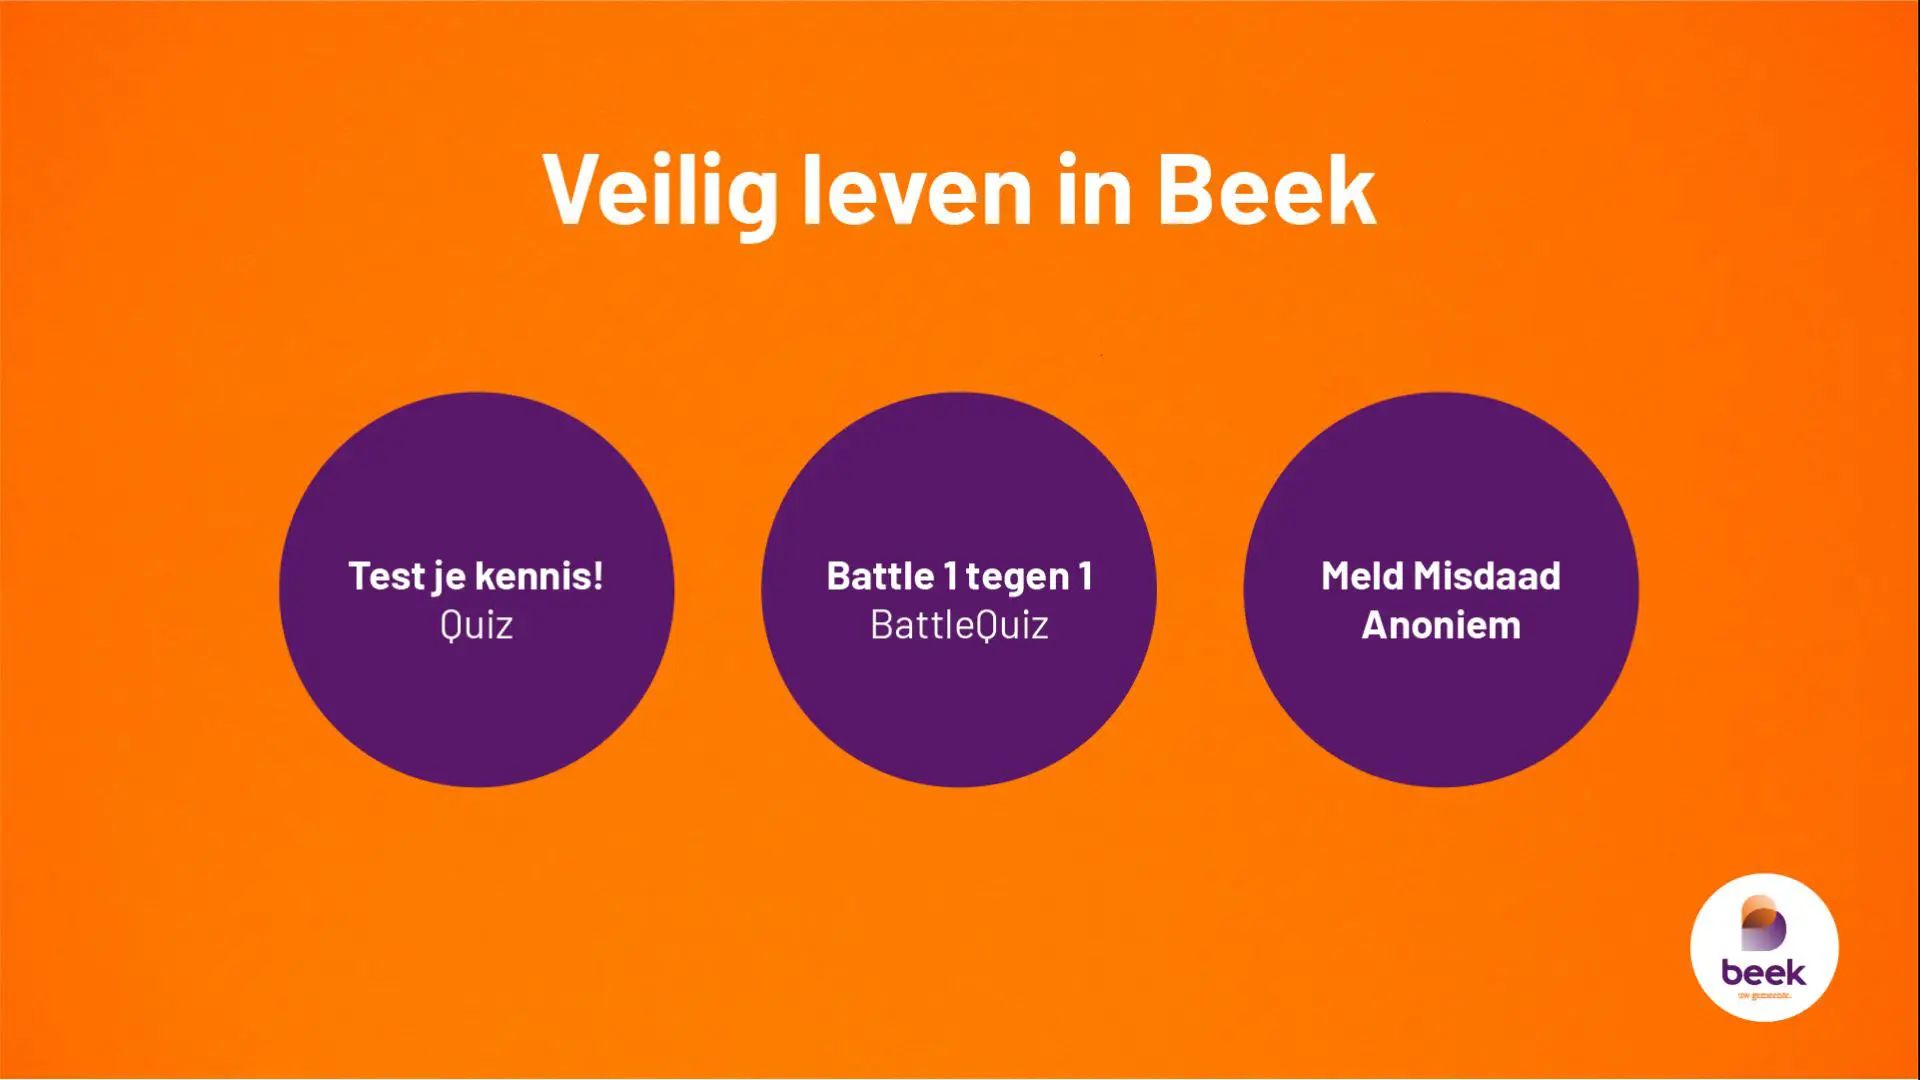 Omnitapps rental license for Municipality of Beek. Two games and an information page